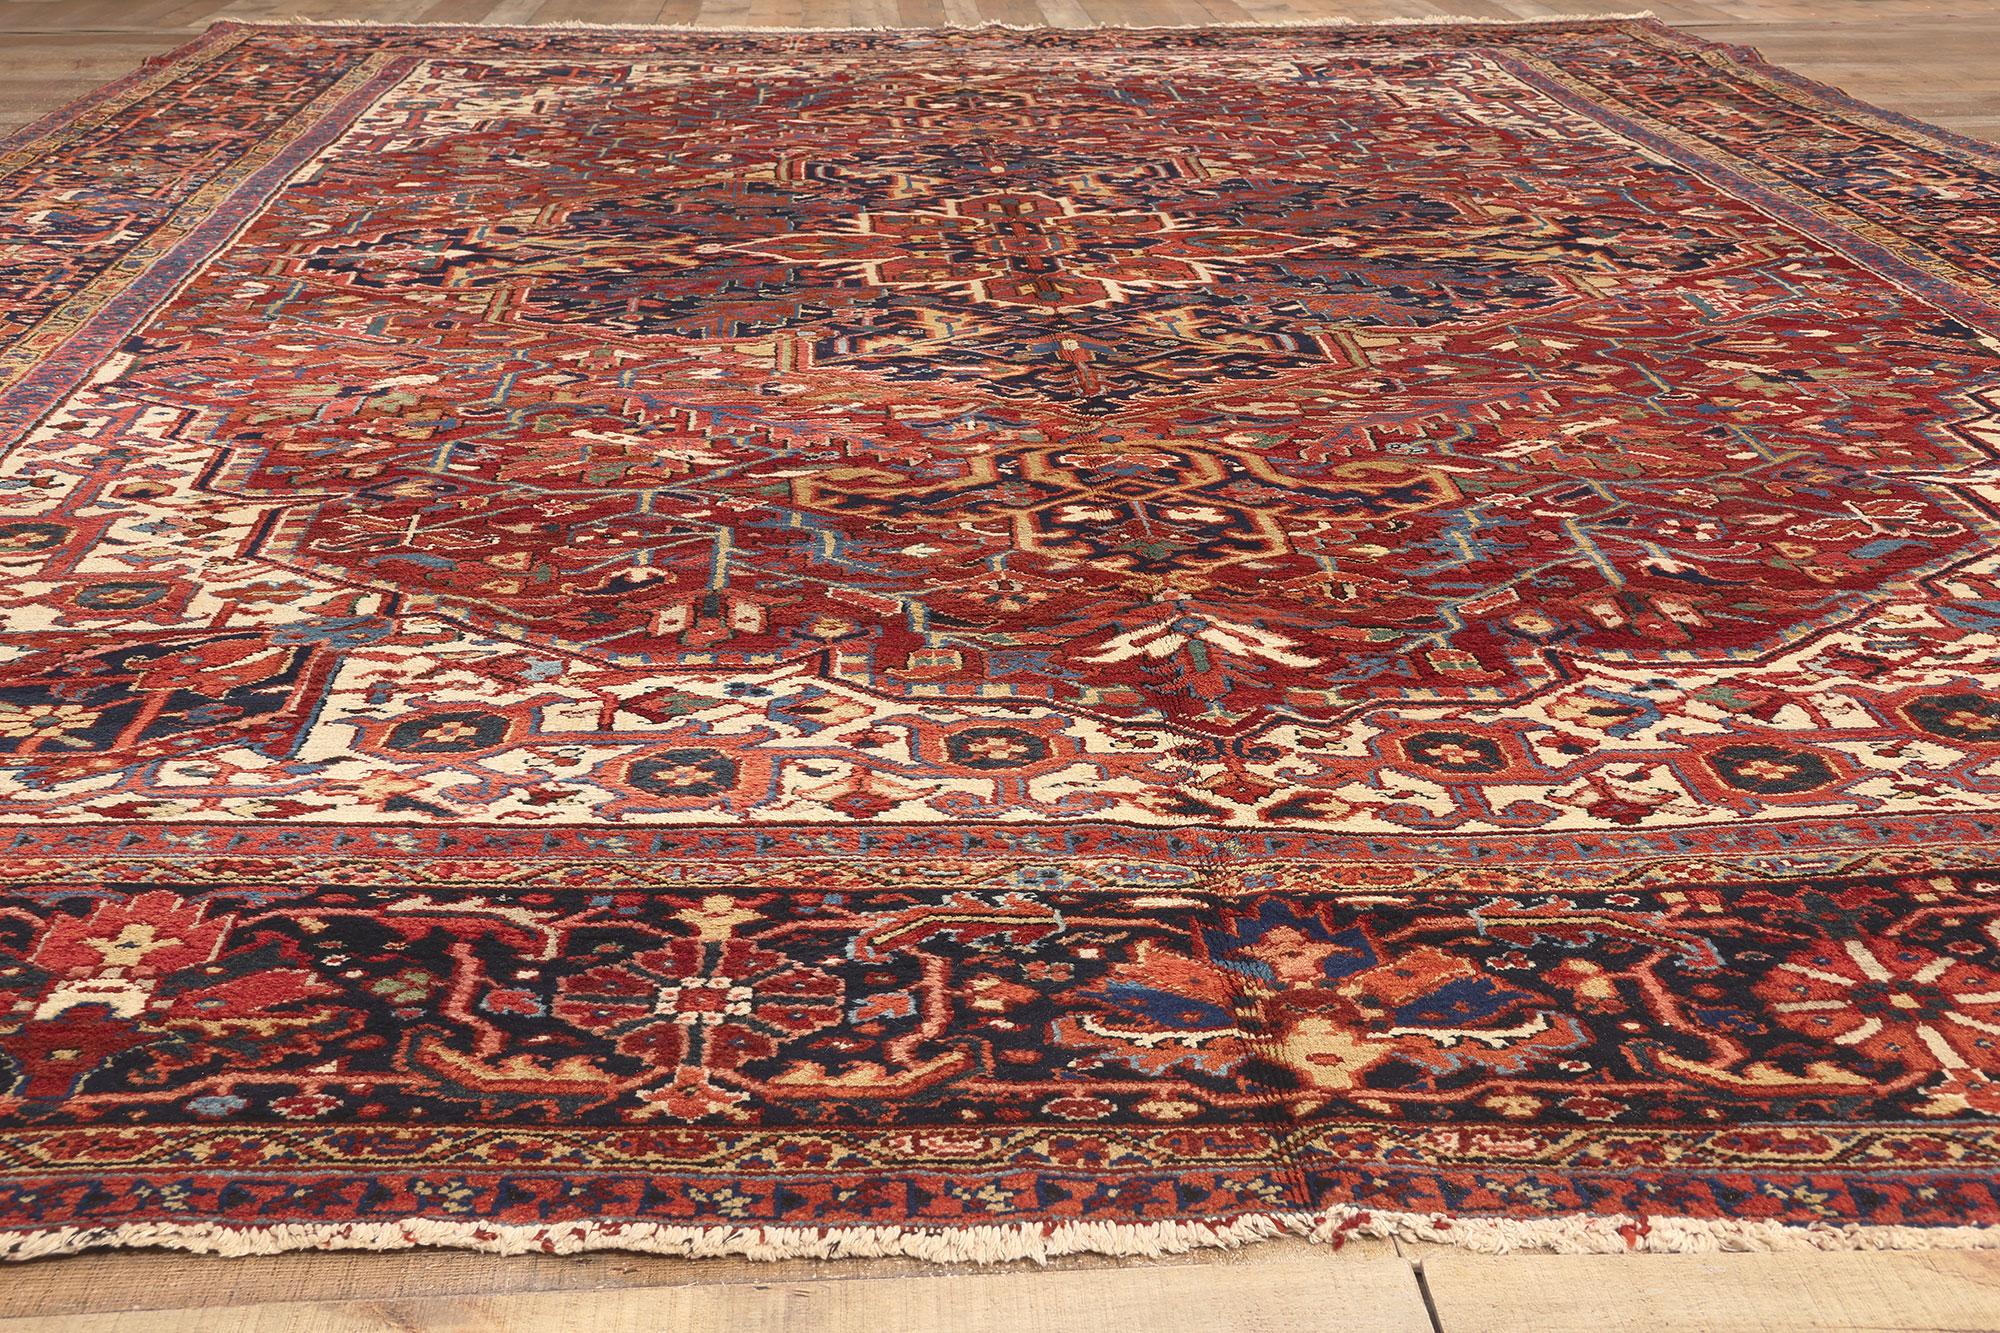 Wool 1920s Extra-Large Antique Red Persian Rug Heriz Carpet 